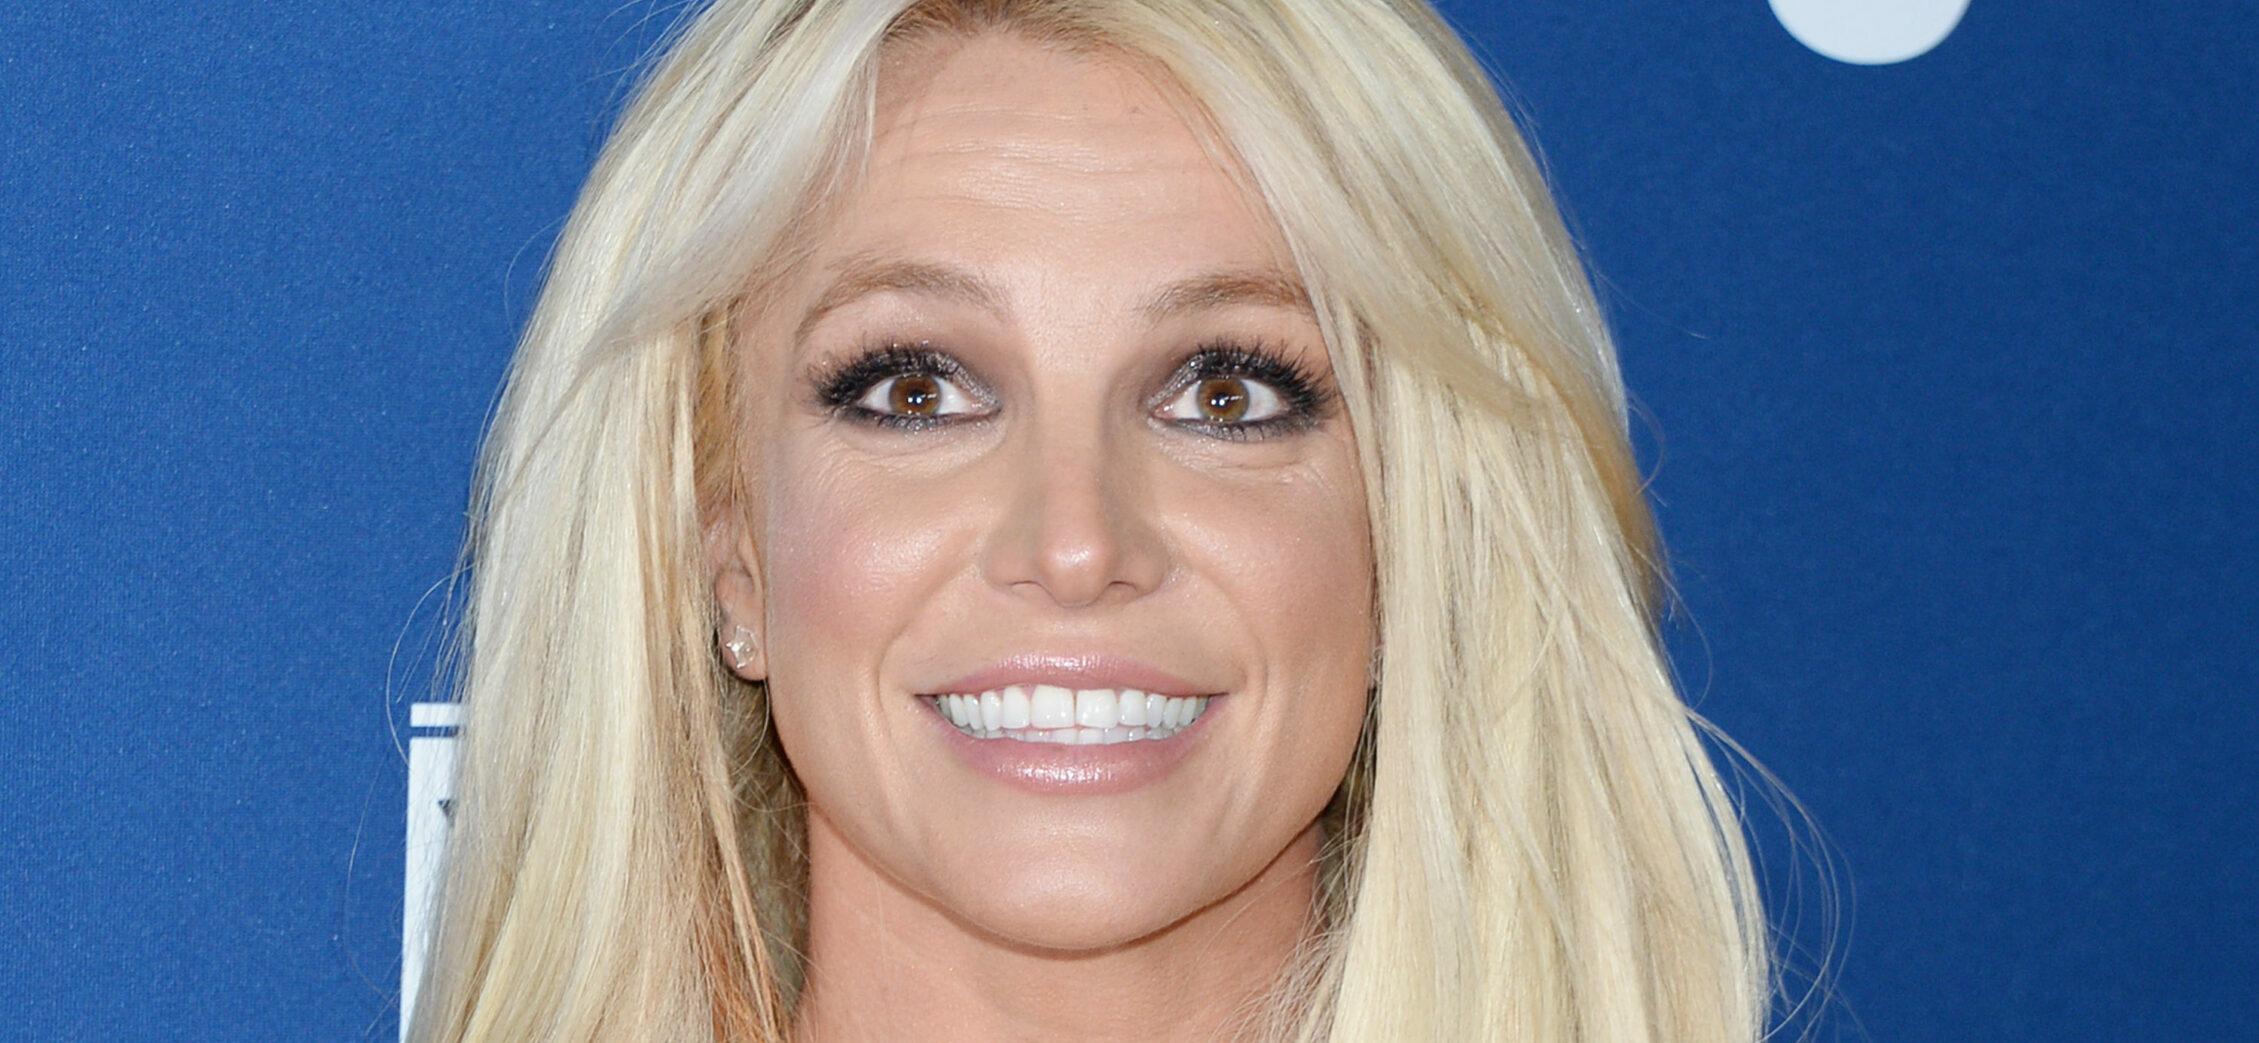 Britney Spears, Now River Red, Says She Is ‘Not Having A Breakdown’